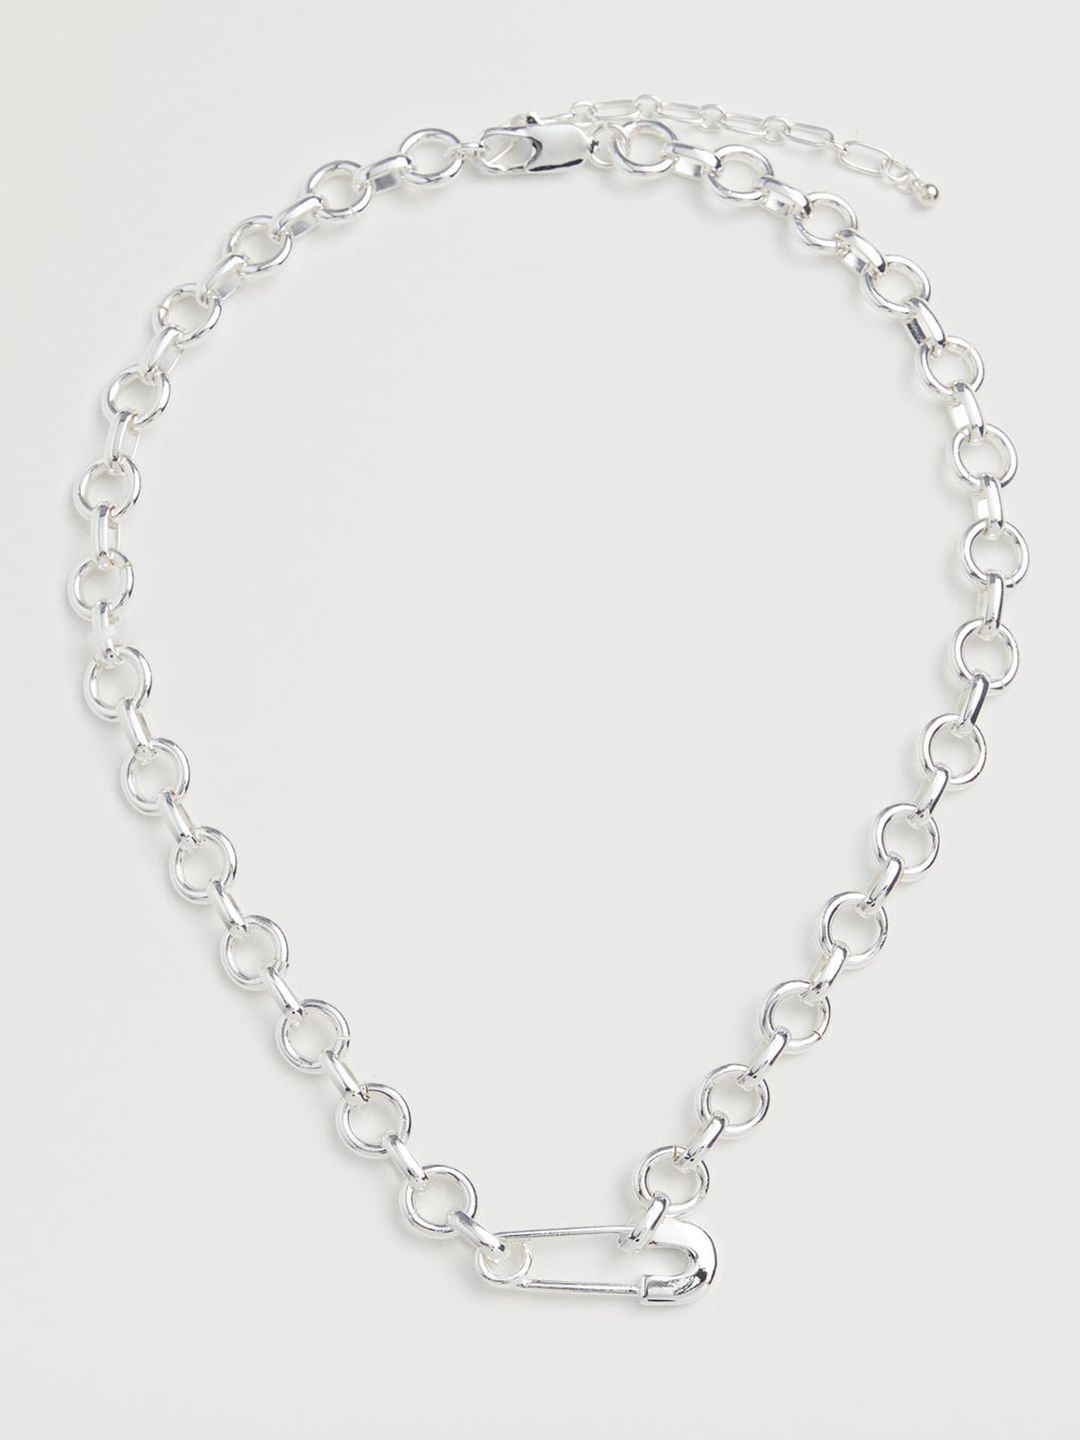 MANGO Silver-Toned Necklace with Safety Pin Detail Price in India